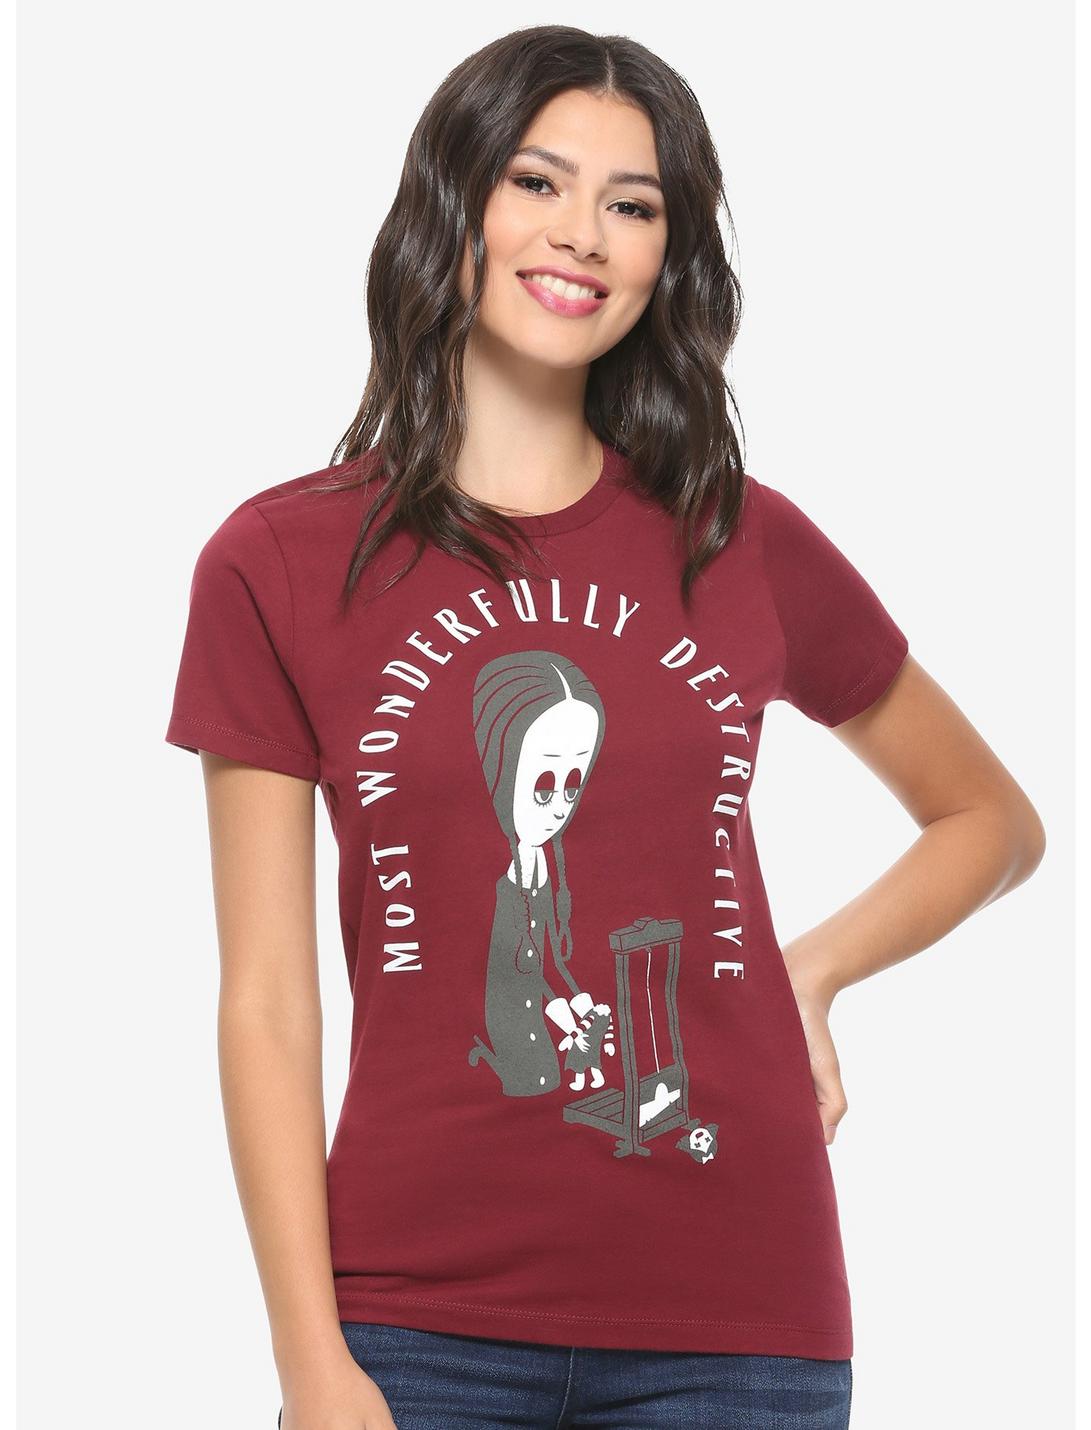 The Addams Family Wednesday Addams Destructive Women's T-Shirt - BoxLunch Exclusive, WINE, hi-res